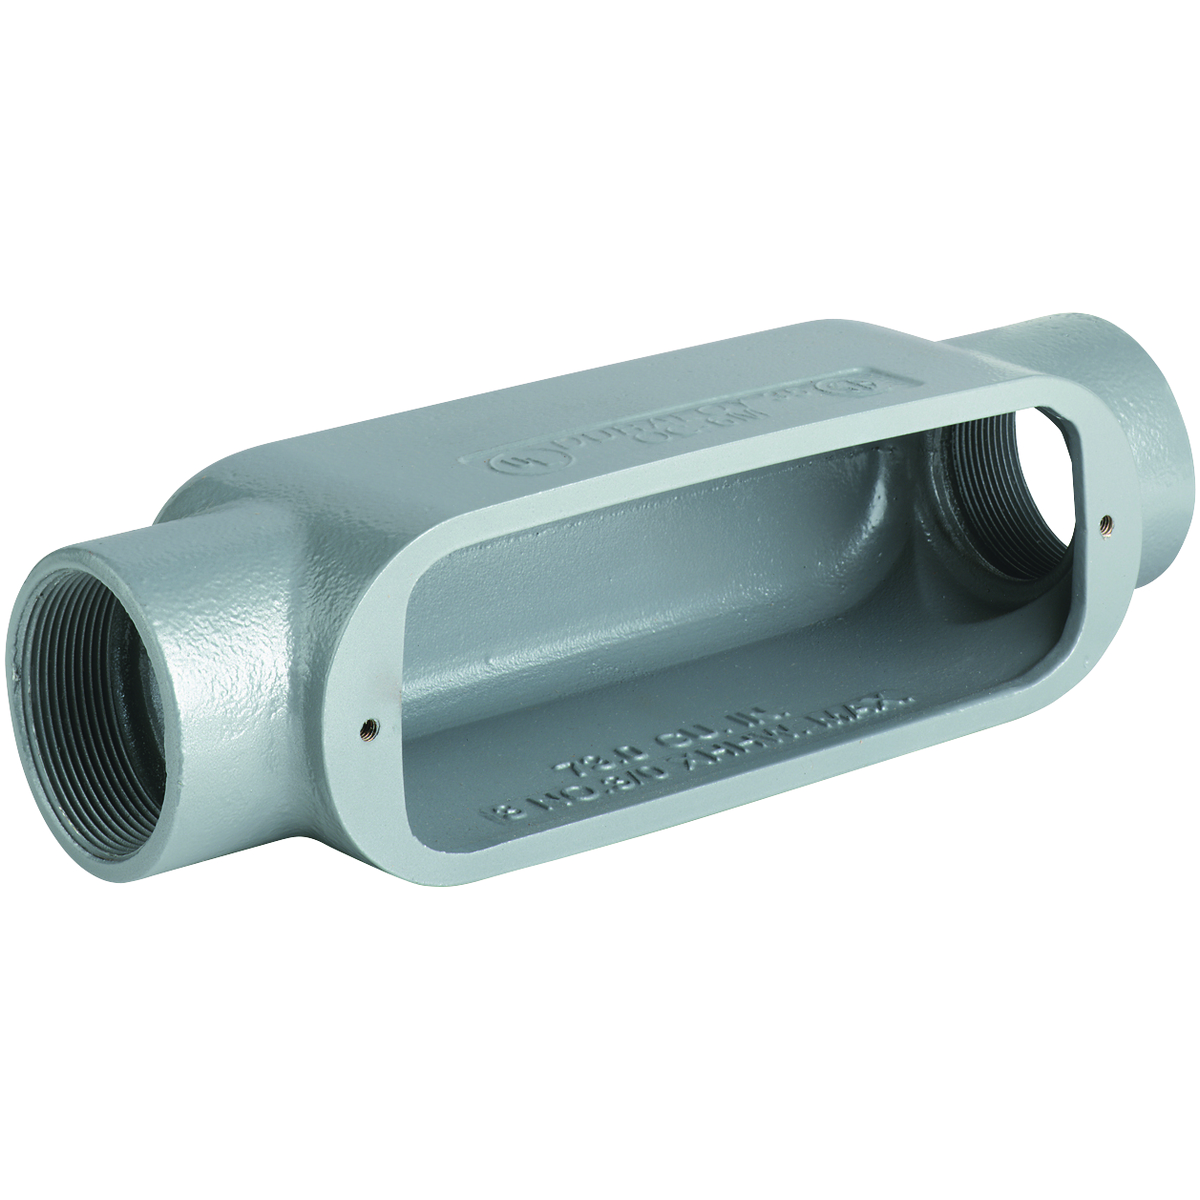 O SERIES/DURALOY 5 SERIES - ALUMINUM CONDUIT BODY - C TYPE - HUB SIZE3/4 INCH - VOLUME 7.0 CUBIC INCHES